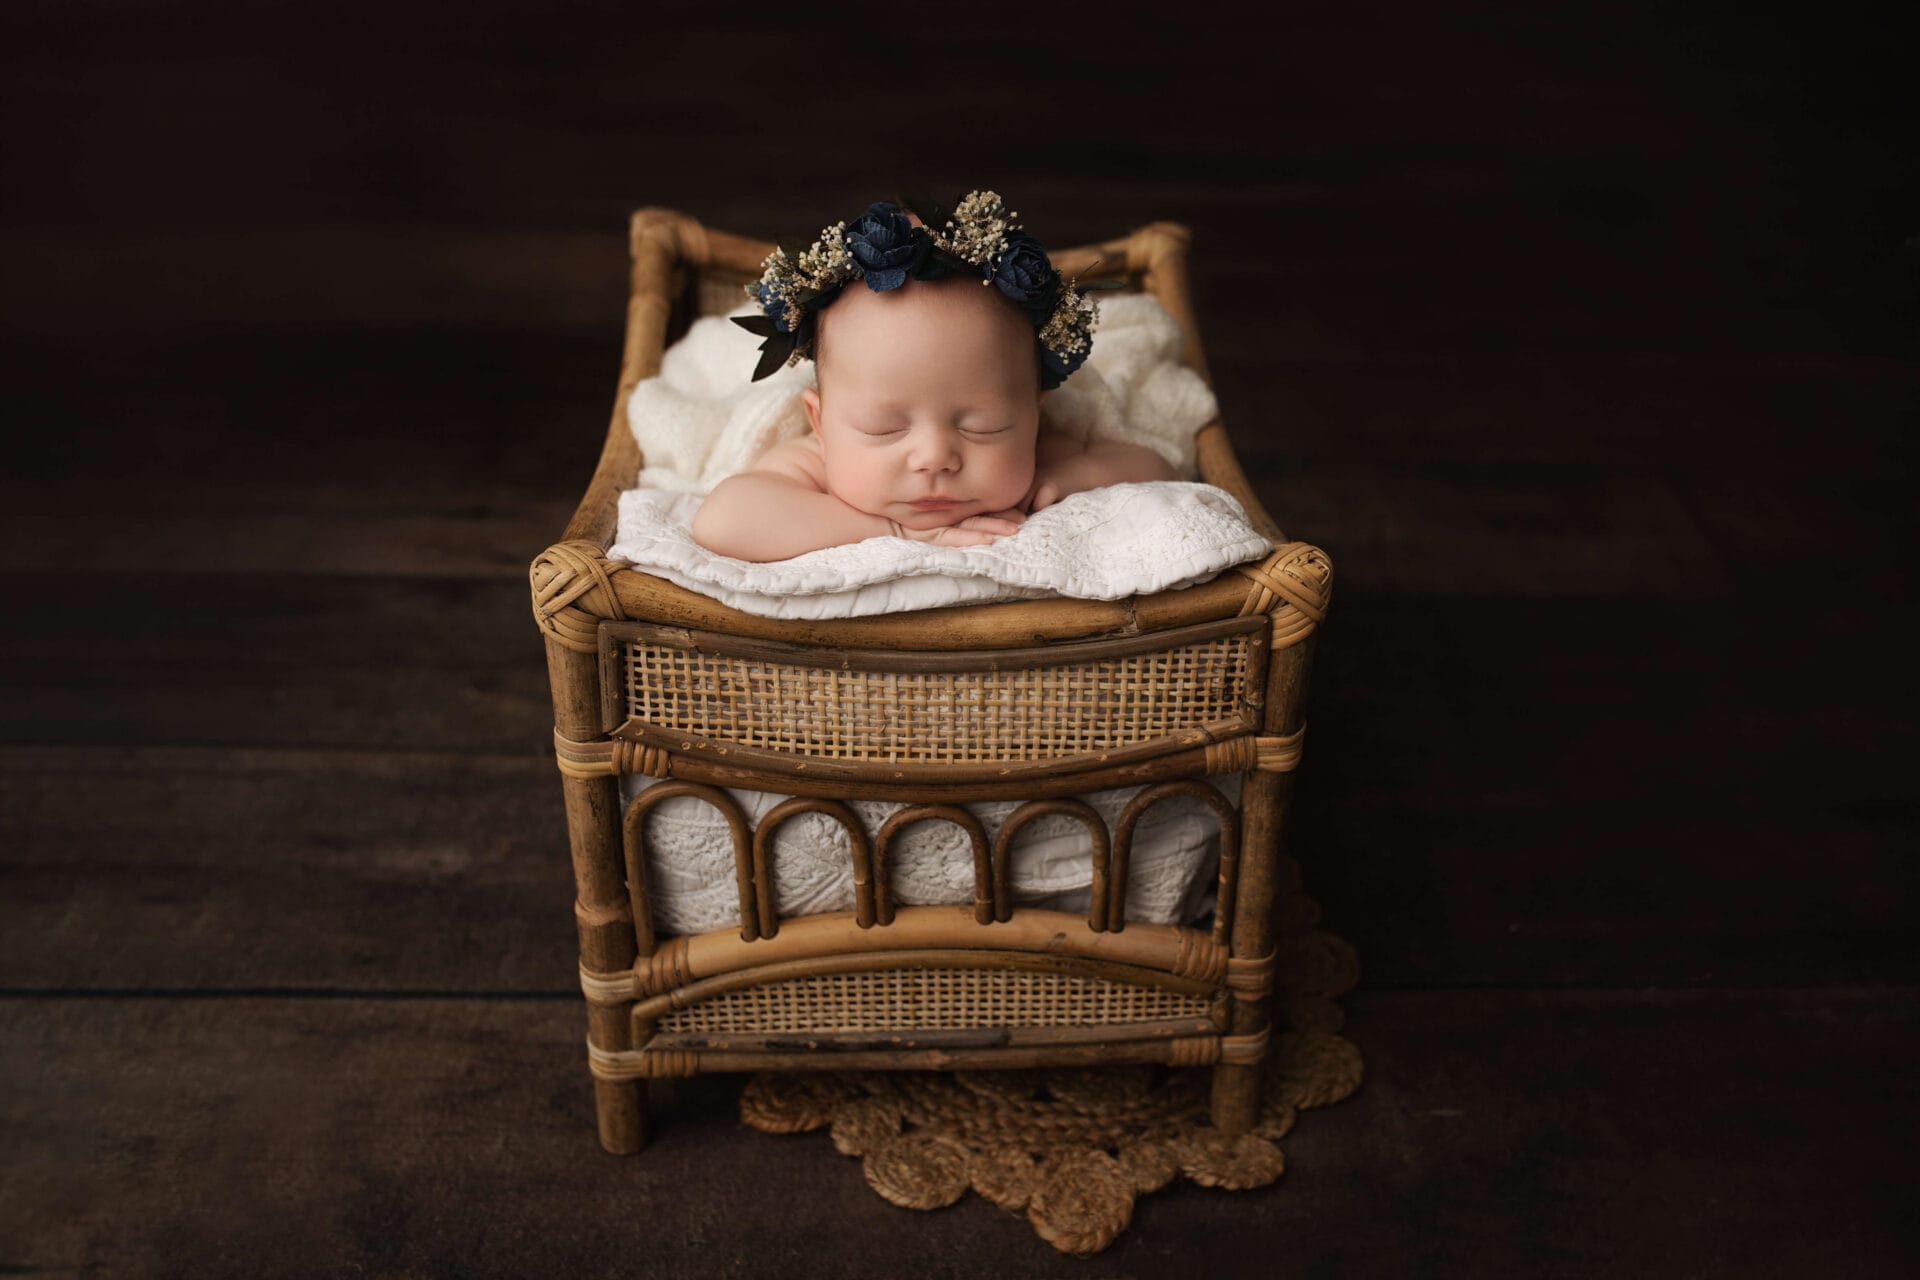 A newborn baby girl wearing a blue floral headband posed with her hands under her chin in a bamboo prop.